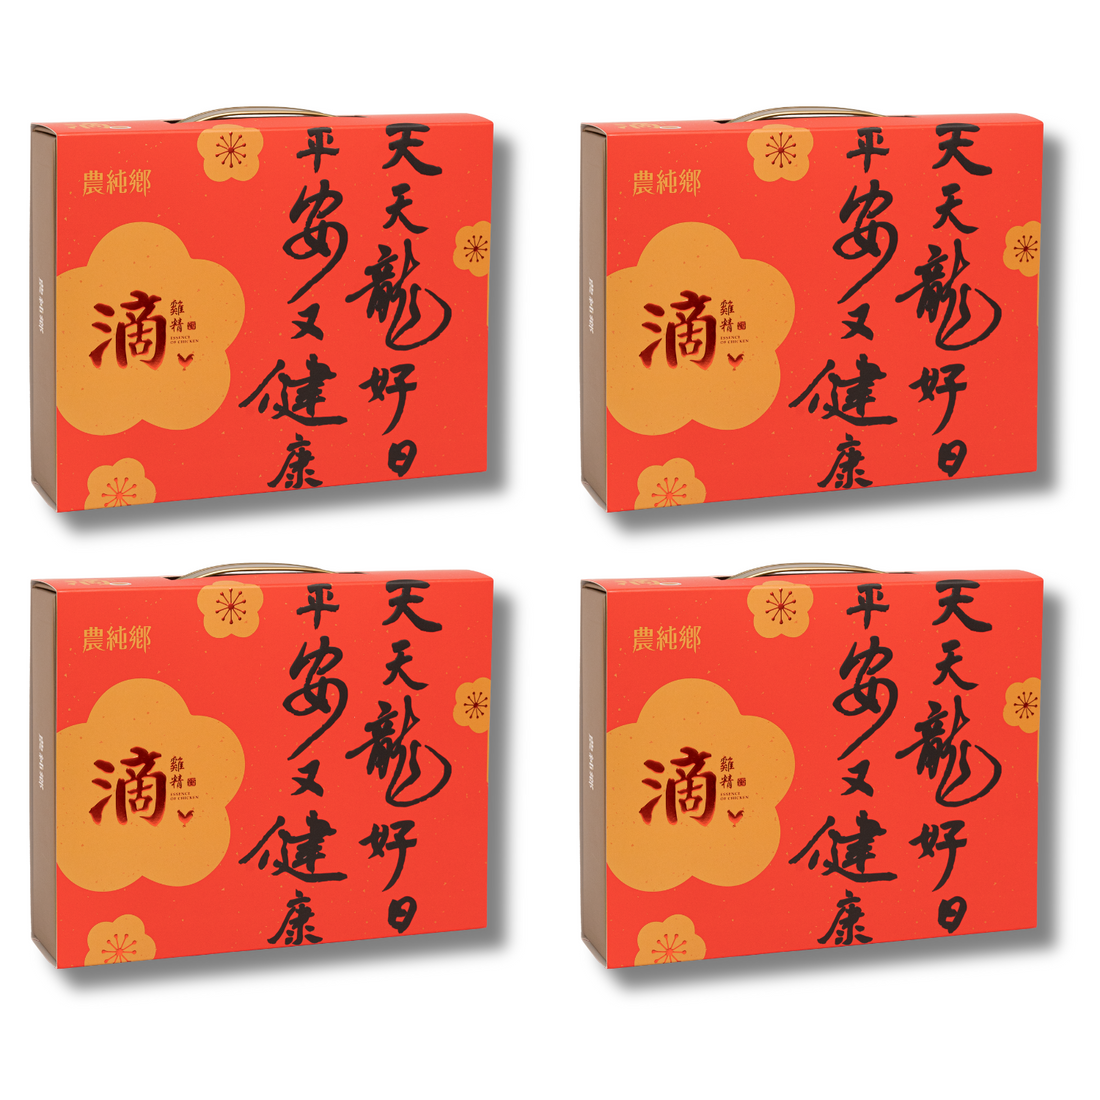 Nong Chun Xiang Chicken Essence【Dragon Year Limited Edition】x 4 packs【One Months Confinement】